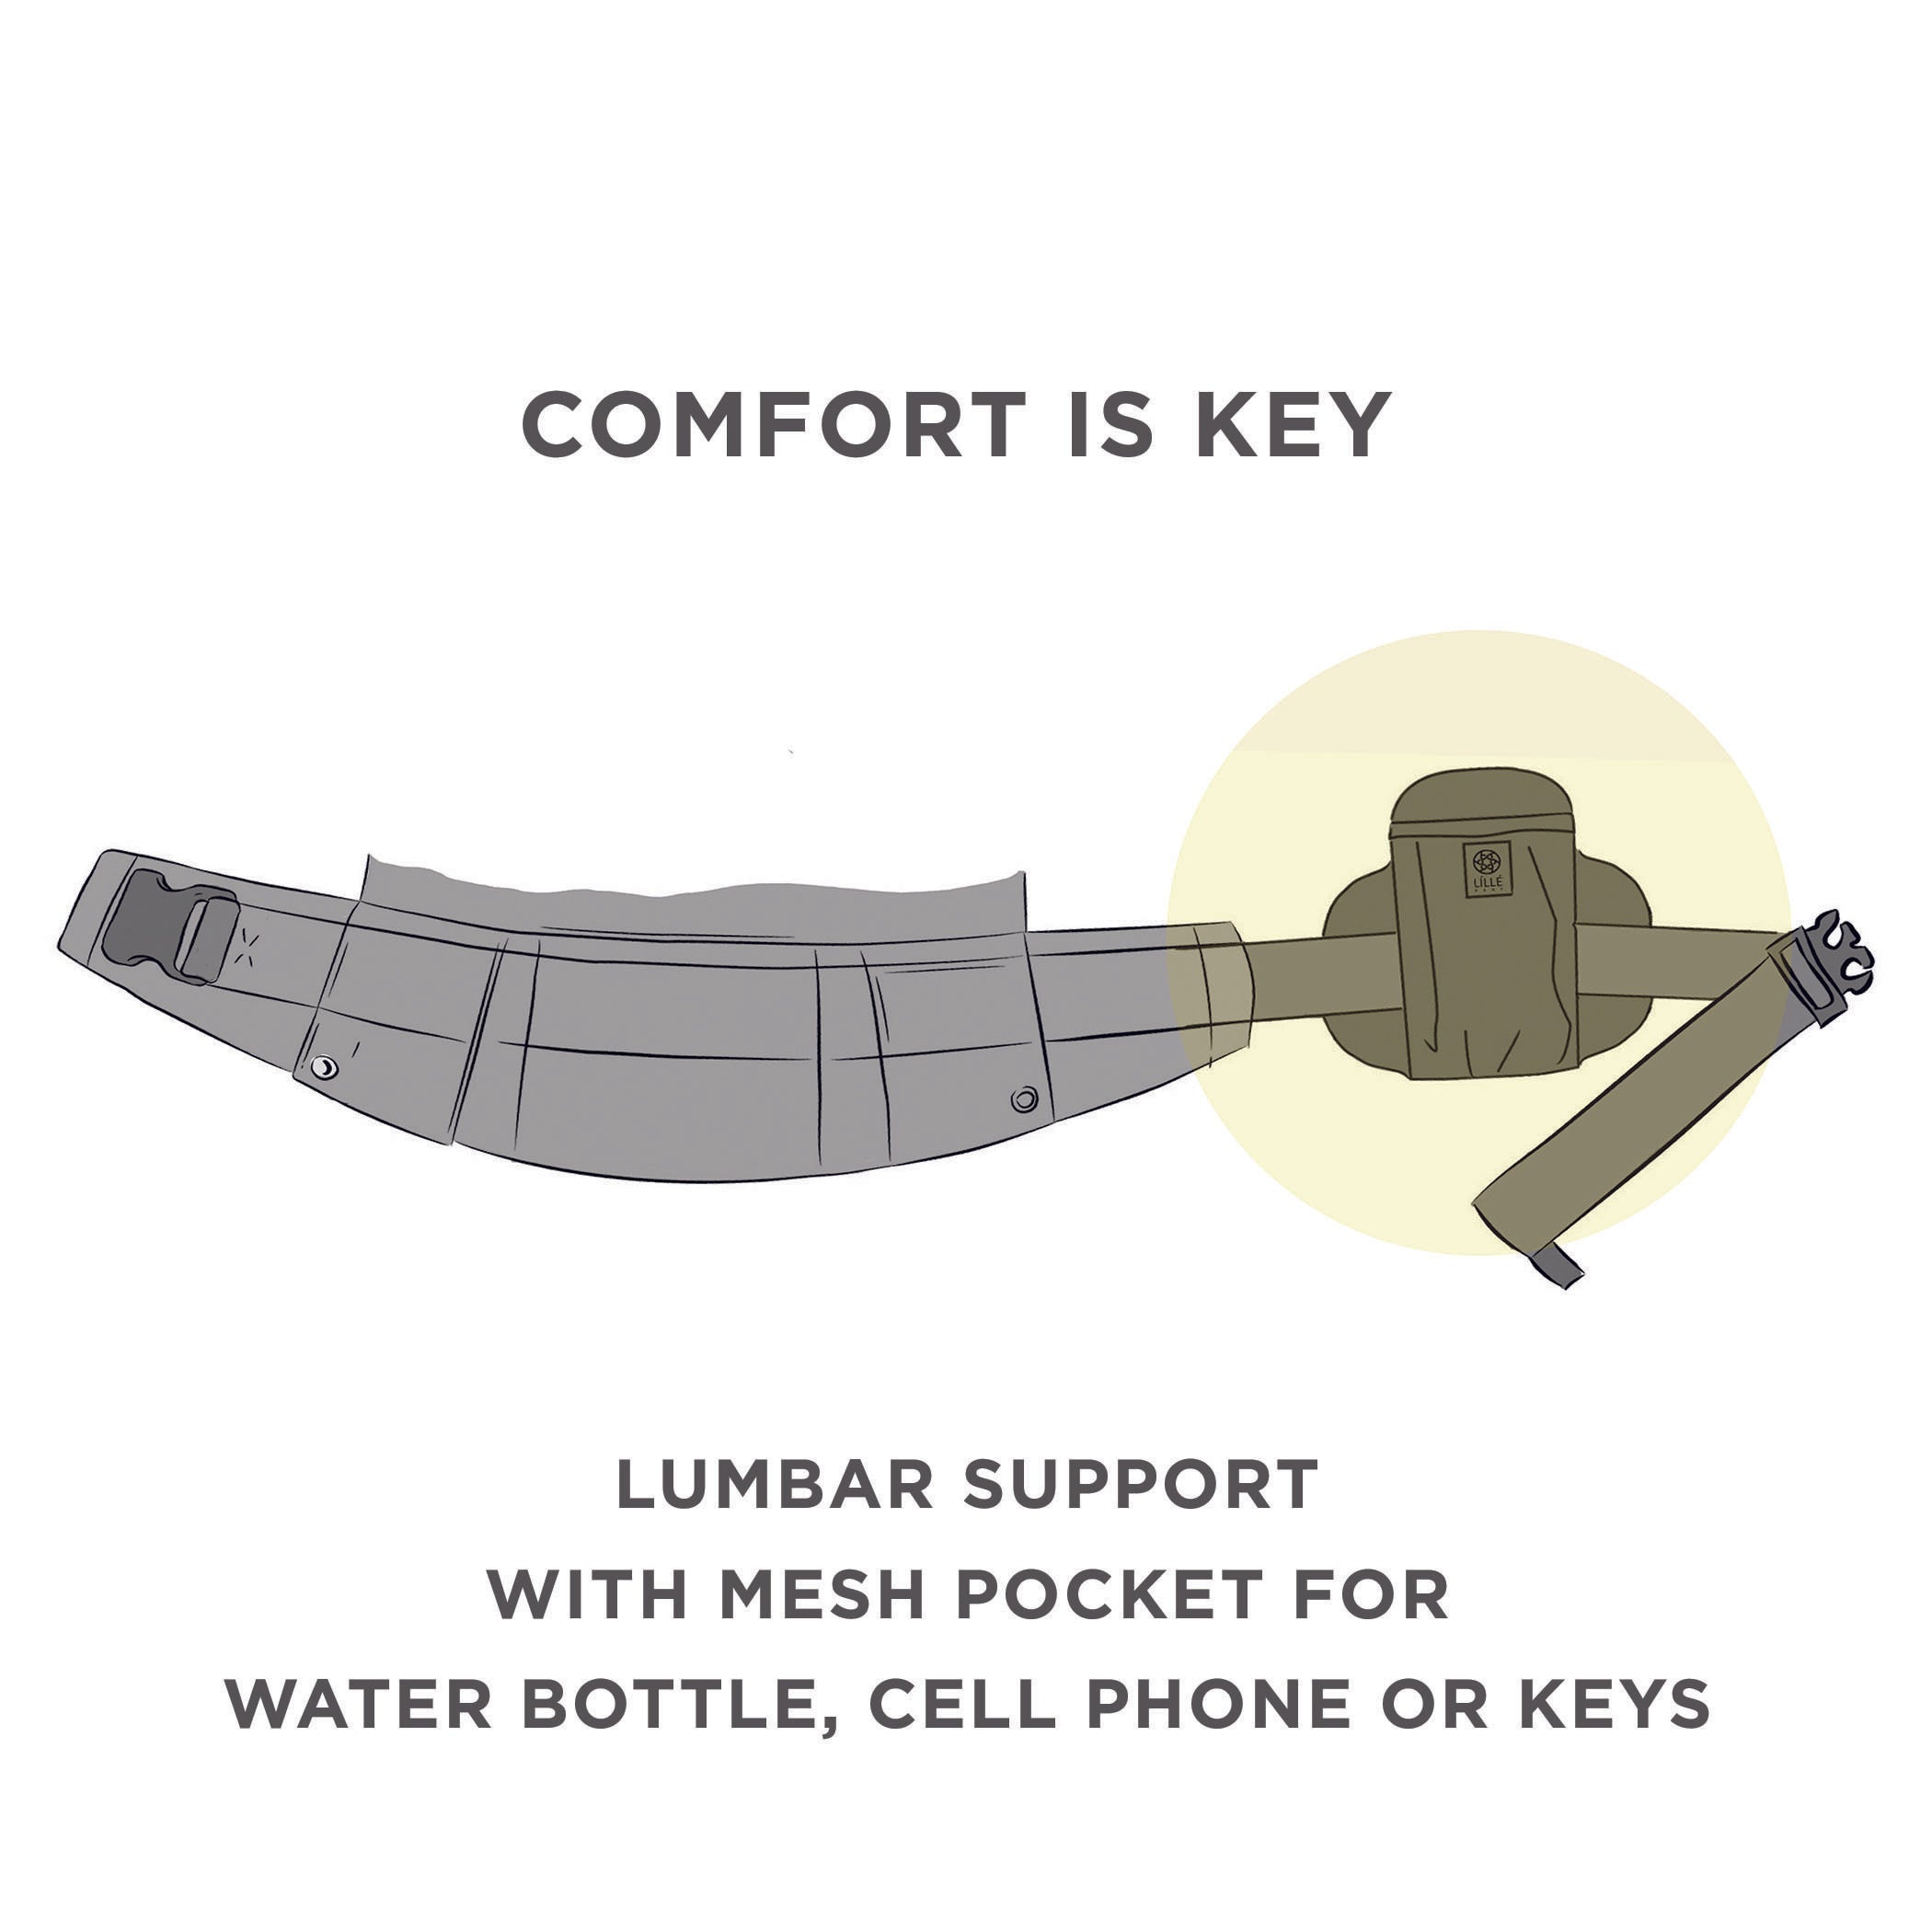 comfort is key, lumbar support with mesh pocket for water bottle, cellphone or keys